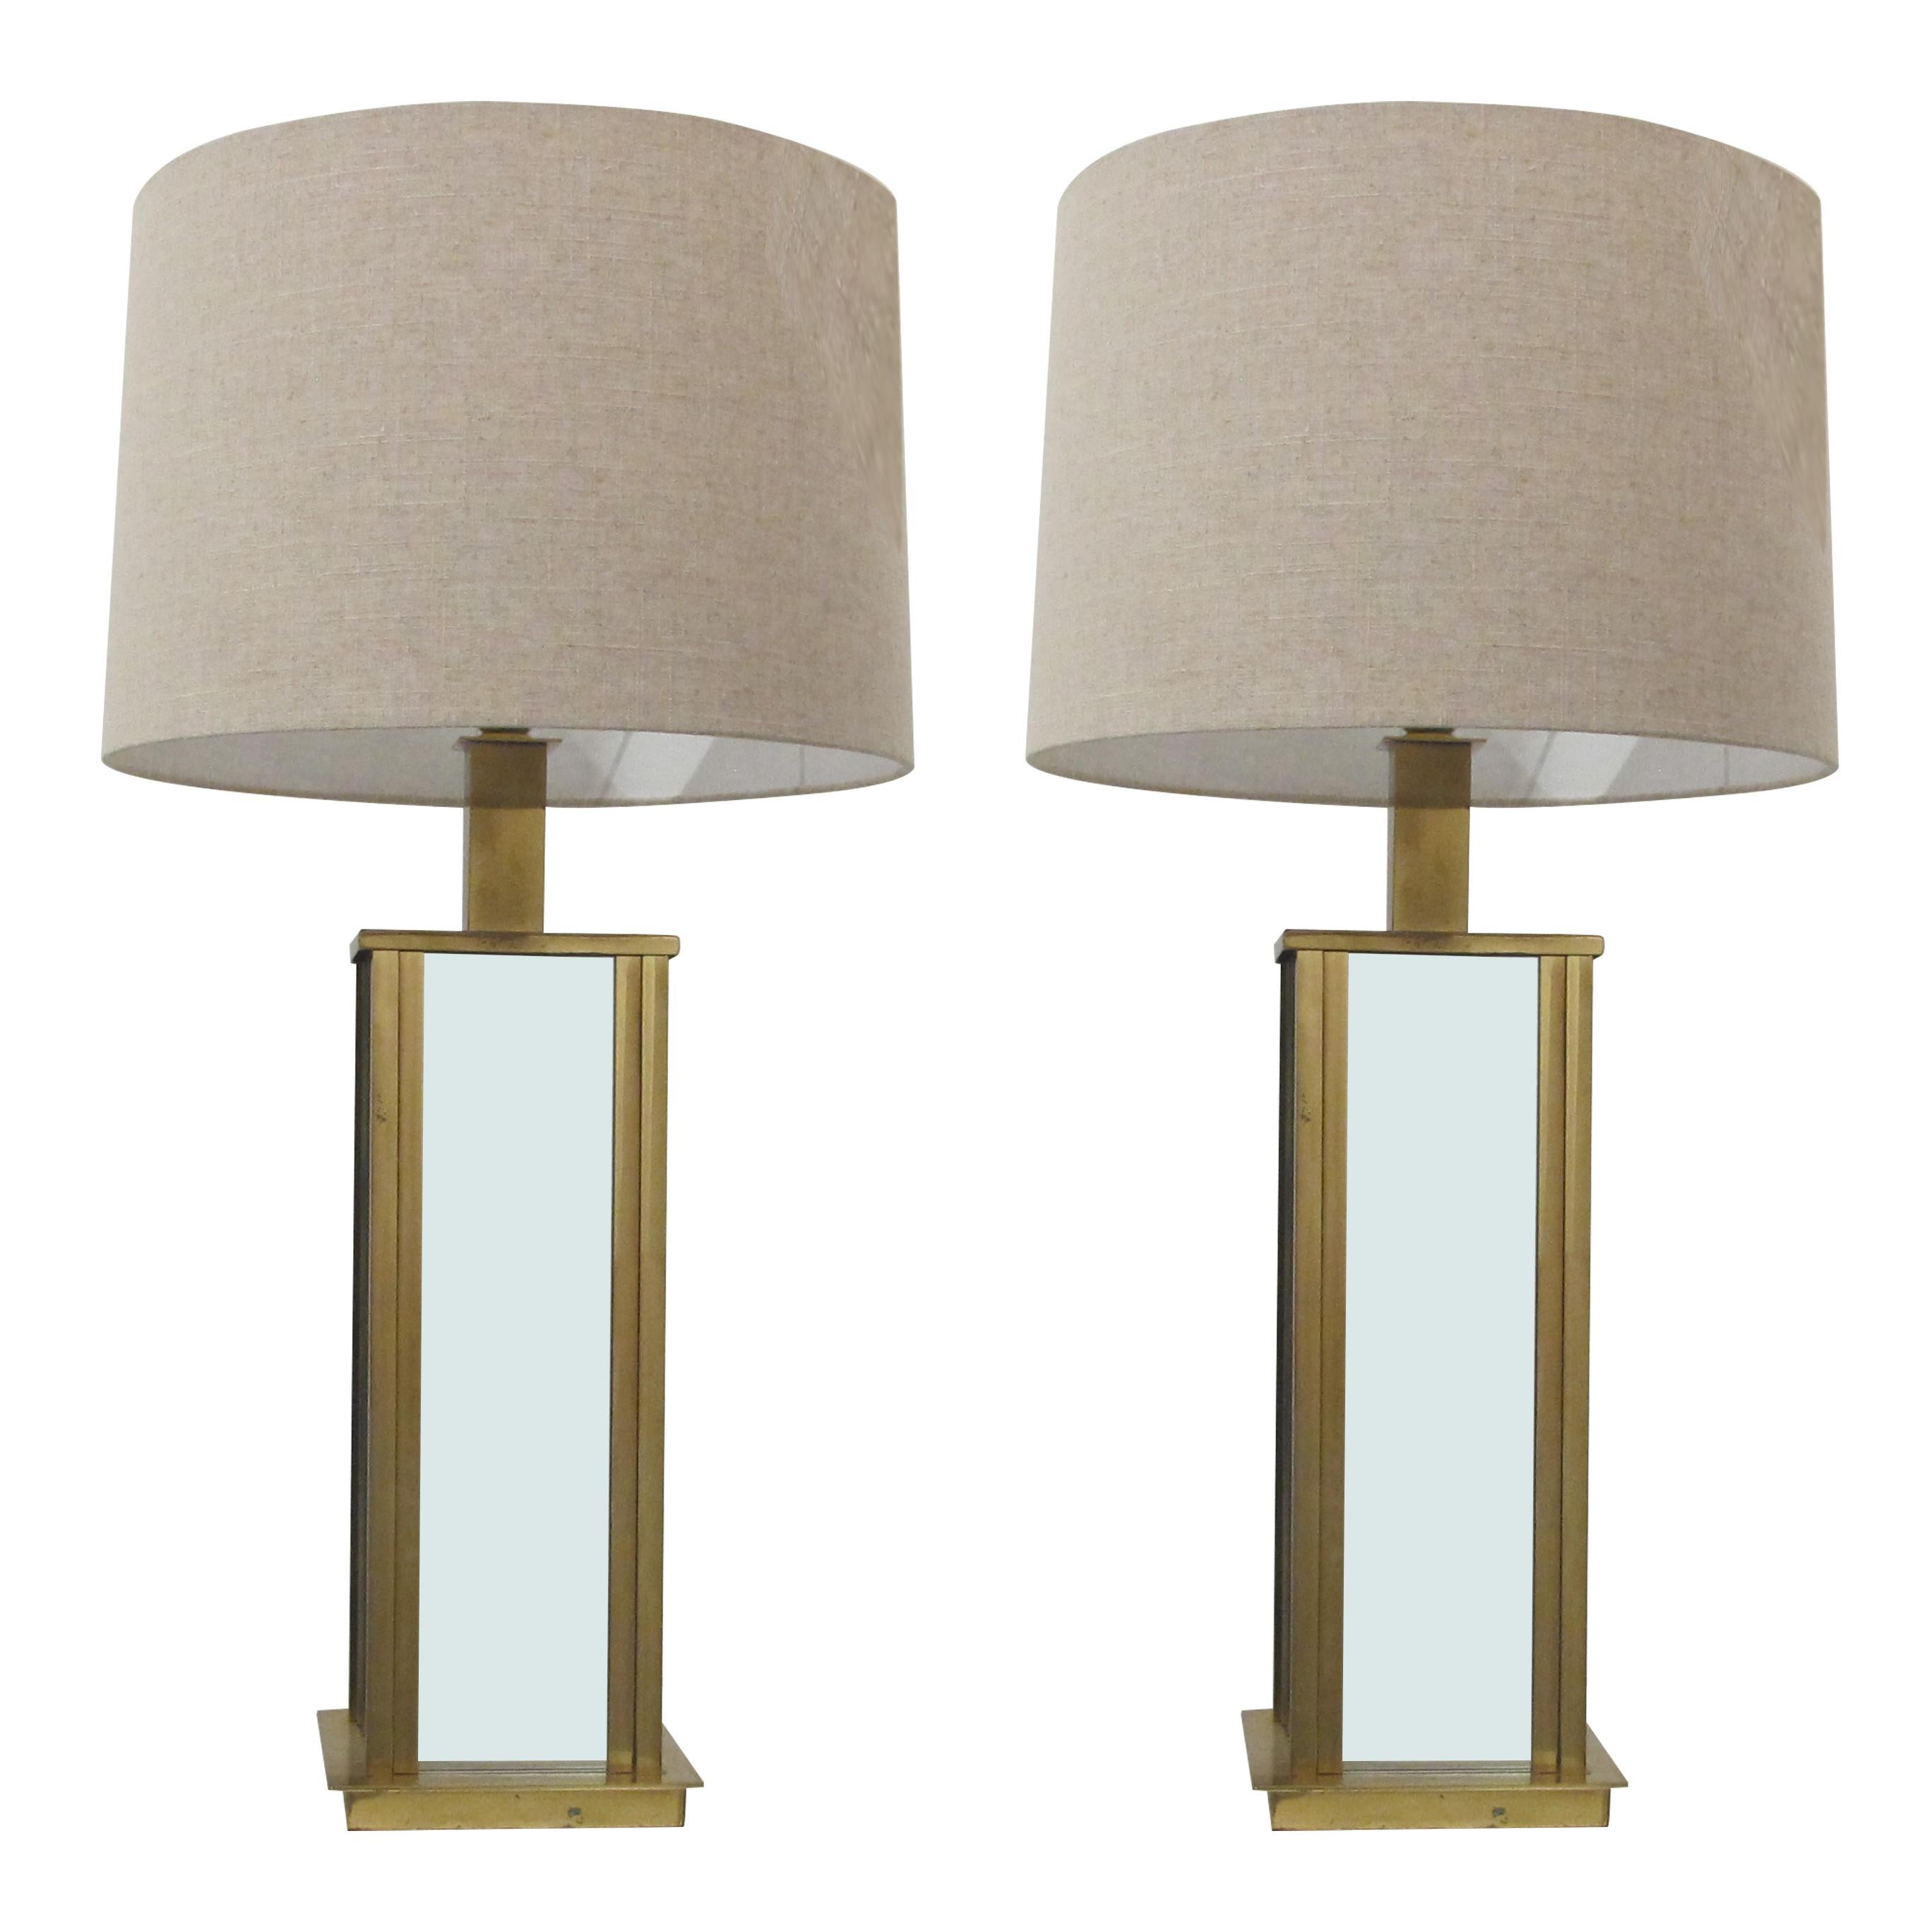 Elegant very well made Mid-century Italian large rectangular pair of table lamps with four mirrored facets encased in a brass frame. The frames have acquired a little bit of tarnishing which does not distract from the overall look of the lamps. One